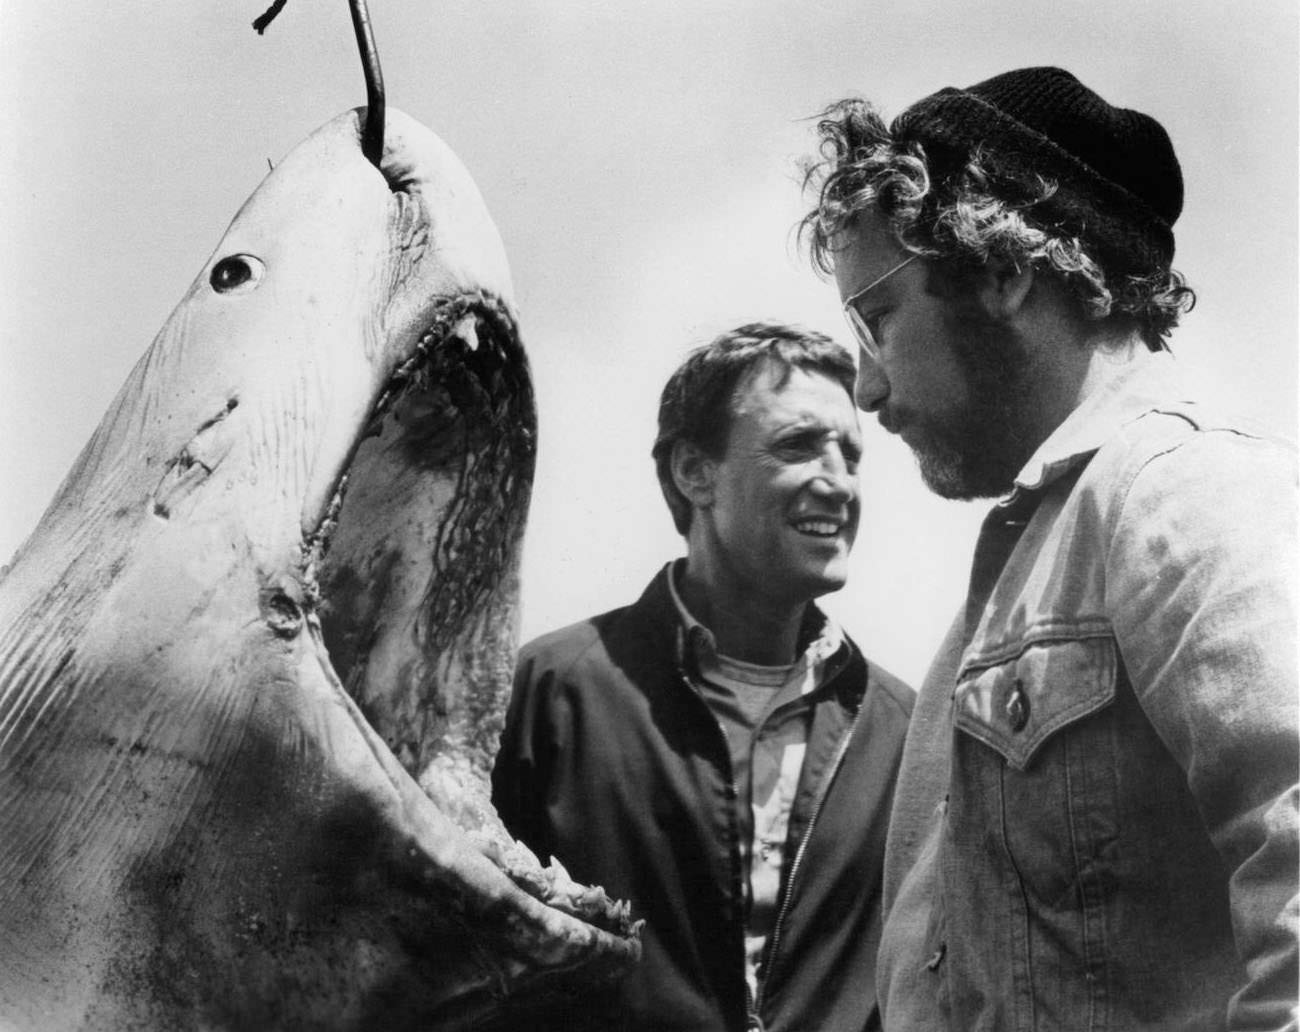 Roy Scheider and Richard Dreyfuss stand next to a giant man eating Great White Shark with a hook piercing through it in a scene from the film 'Jaws', 1975.